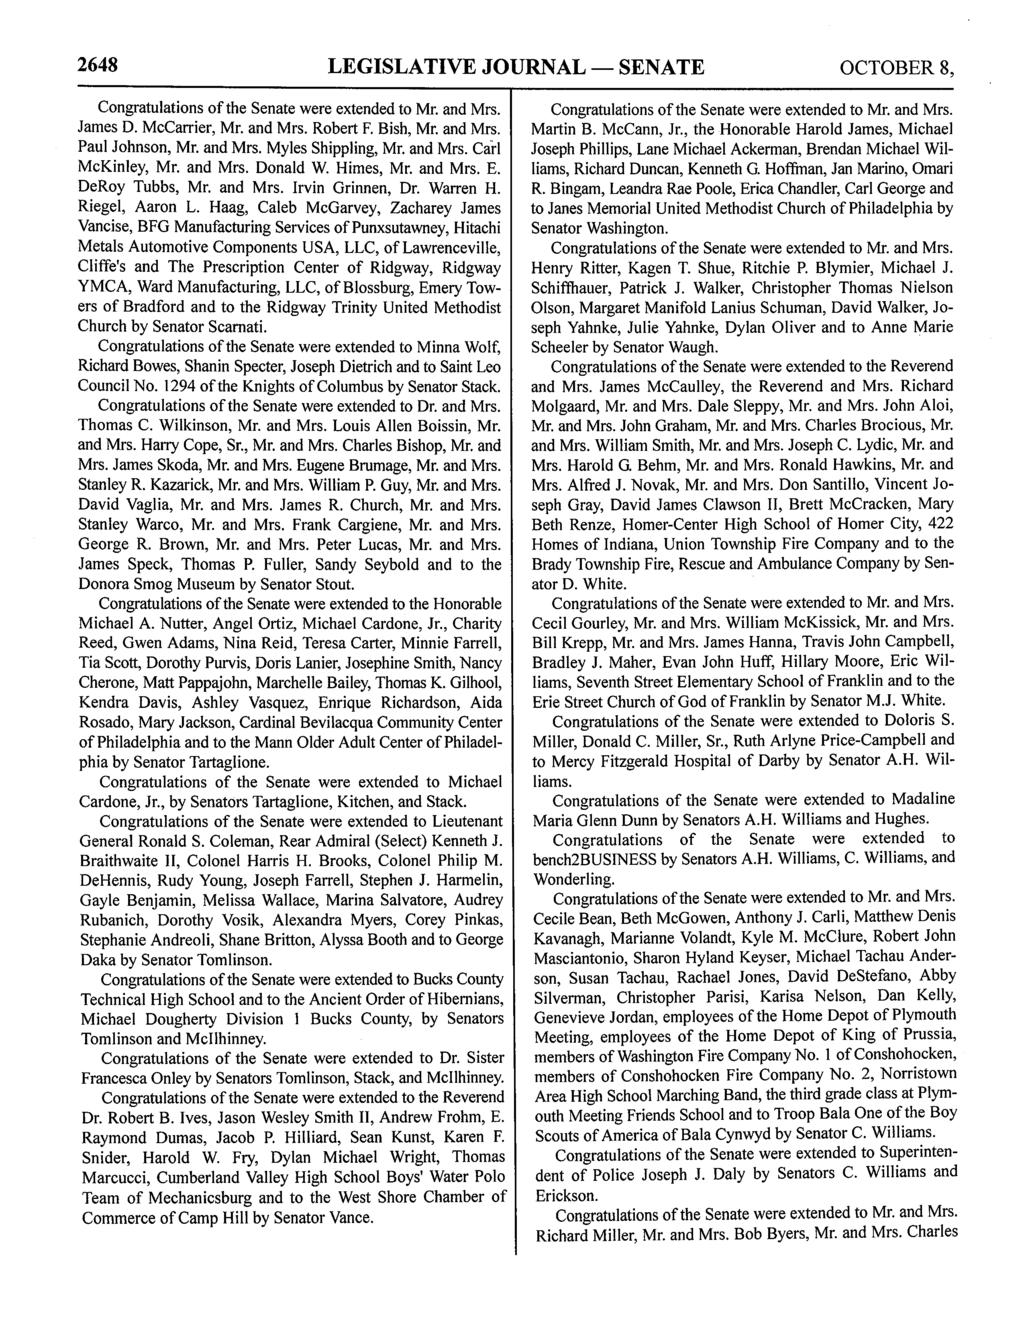 2648 LEGISLATIVE JOURNAL - SENATE OCTOBER 8, James D. McCarrier, Mr. and Mrs. Robert F. Bish, Mr. and Mrs. Paul Johnson, Mr. and Mrs. Myles Shippling, Mr. and Mrs. Carl McKinley, Mr. and Mrs. Donald W.